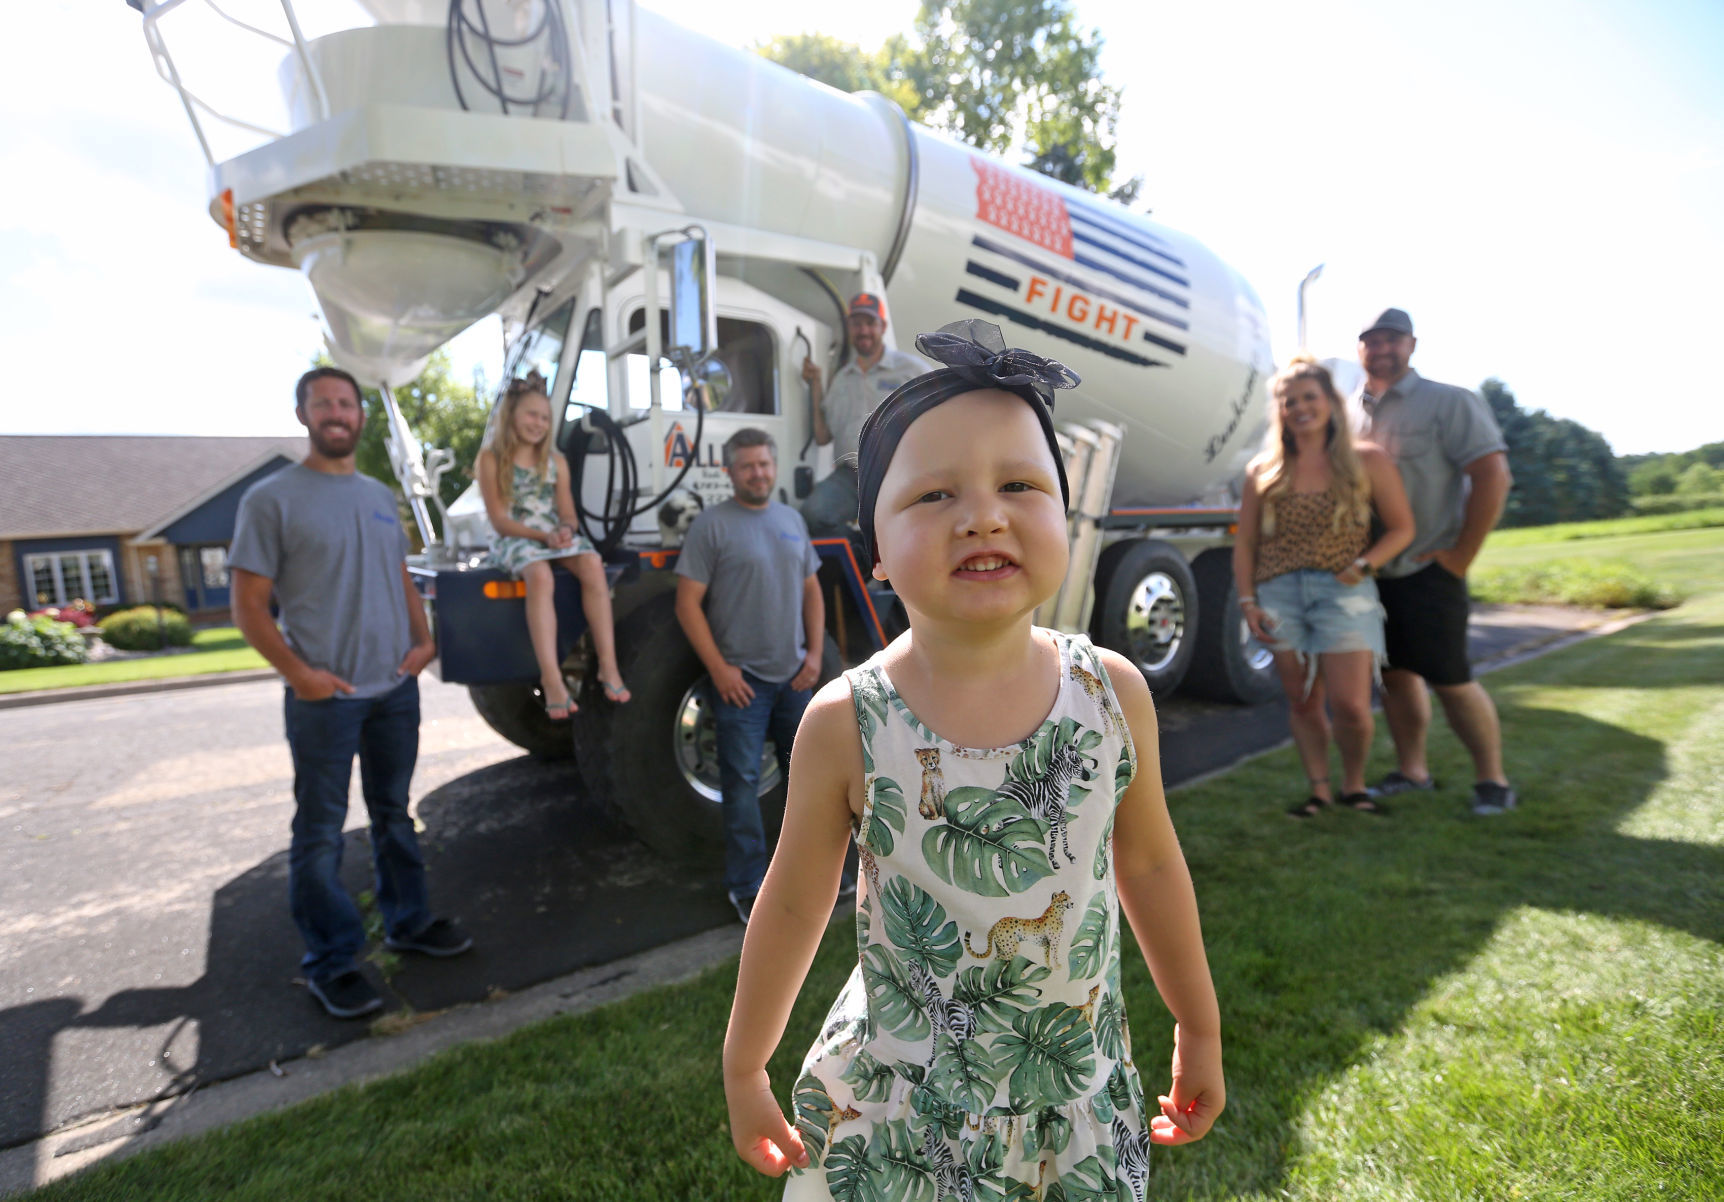 Ruby Ihm, 4, is seen with Matt Rutkowski (from left), Georgia Ihm, 9, Stefan Rutkowski, Dan Ihm, Chelsey Ihm and Steve Ihm in front of an Allied Redi-Mix & Stone truck in Lancaster, Wis., on Sunday. Allied Redi-Mix dedicated one of its trucks to Ruby, who is battling leukemia, and her uncle Dan drives it. PHOTO CREDIT: JESSICA REILLY